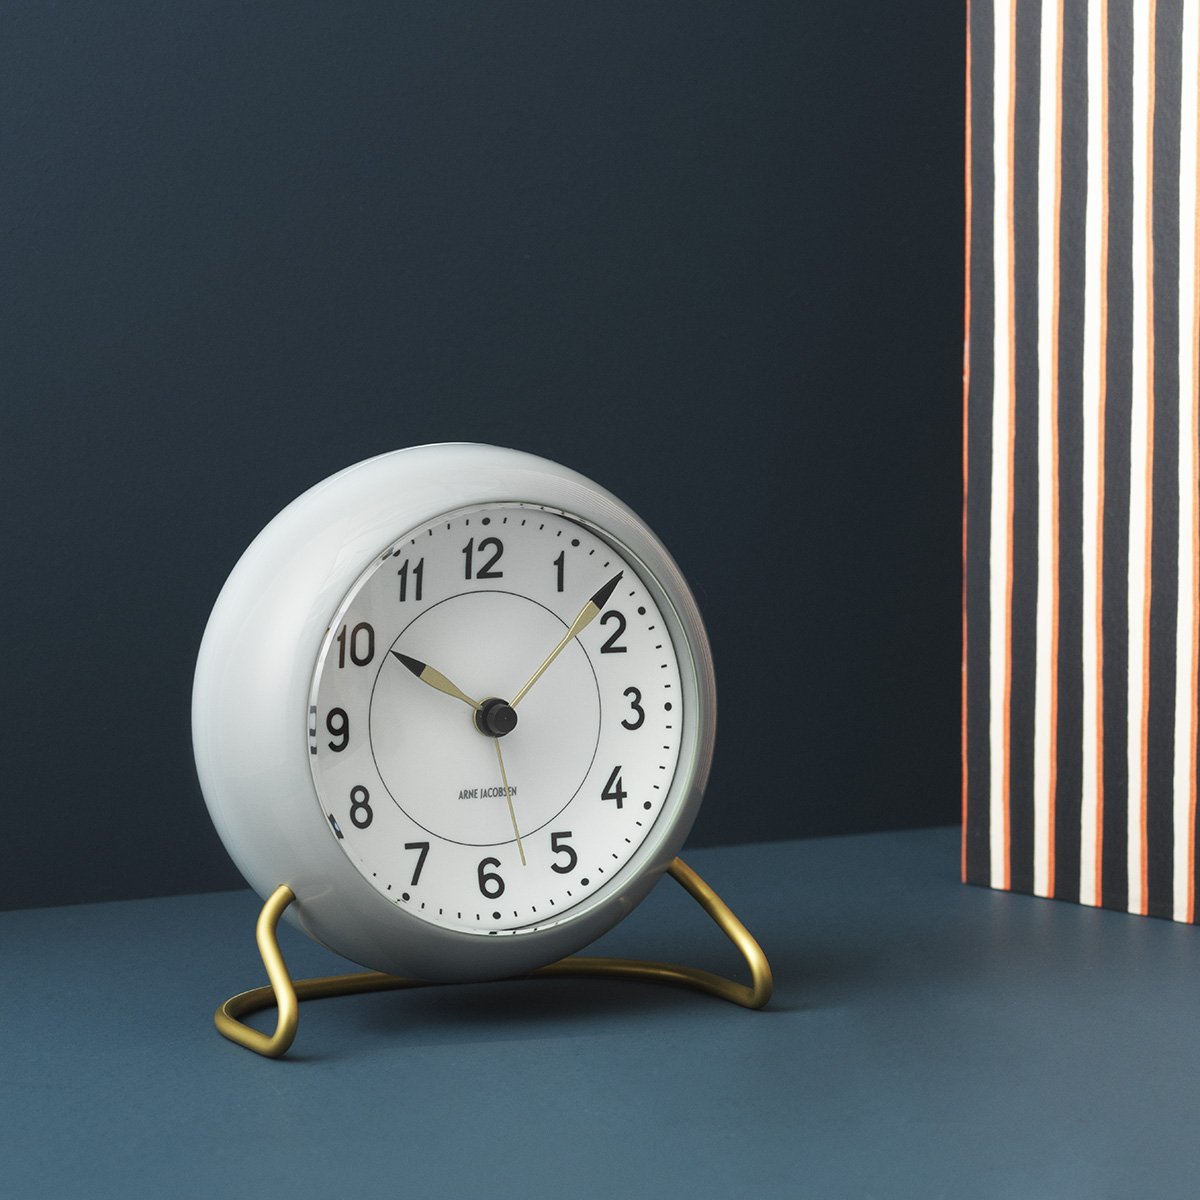 Arne Jacobsen Station Table Clock With Alarm Grey And White, 12cm